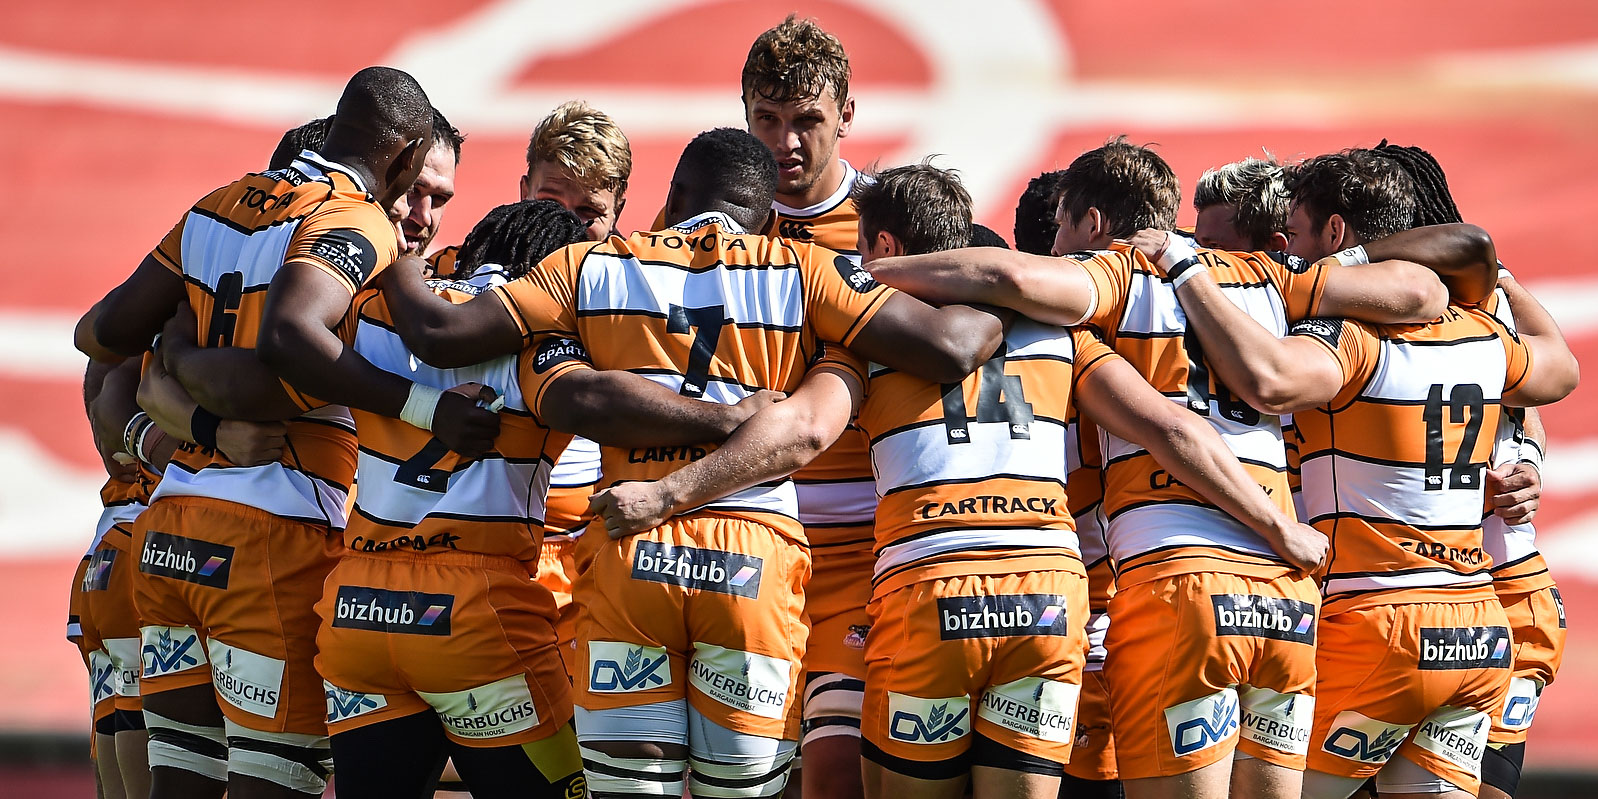 The Toyota Cheetahs will return to an intercontinental competition for the first time since 2020.